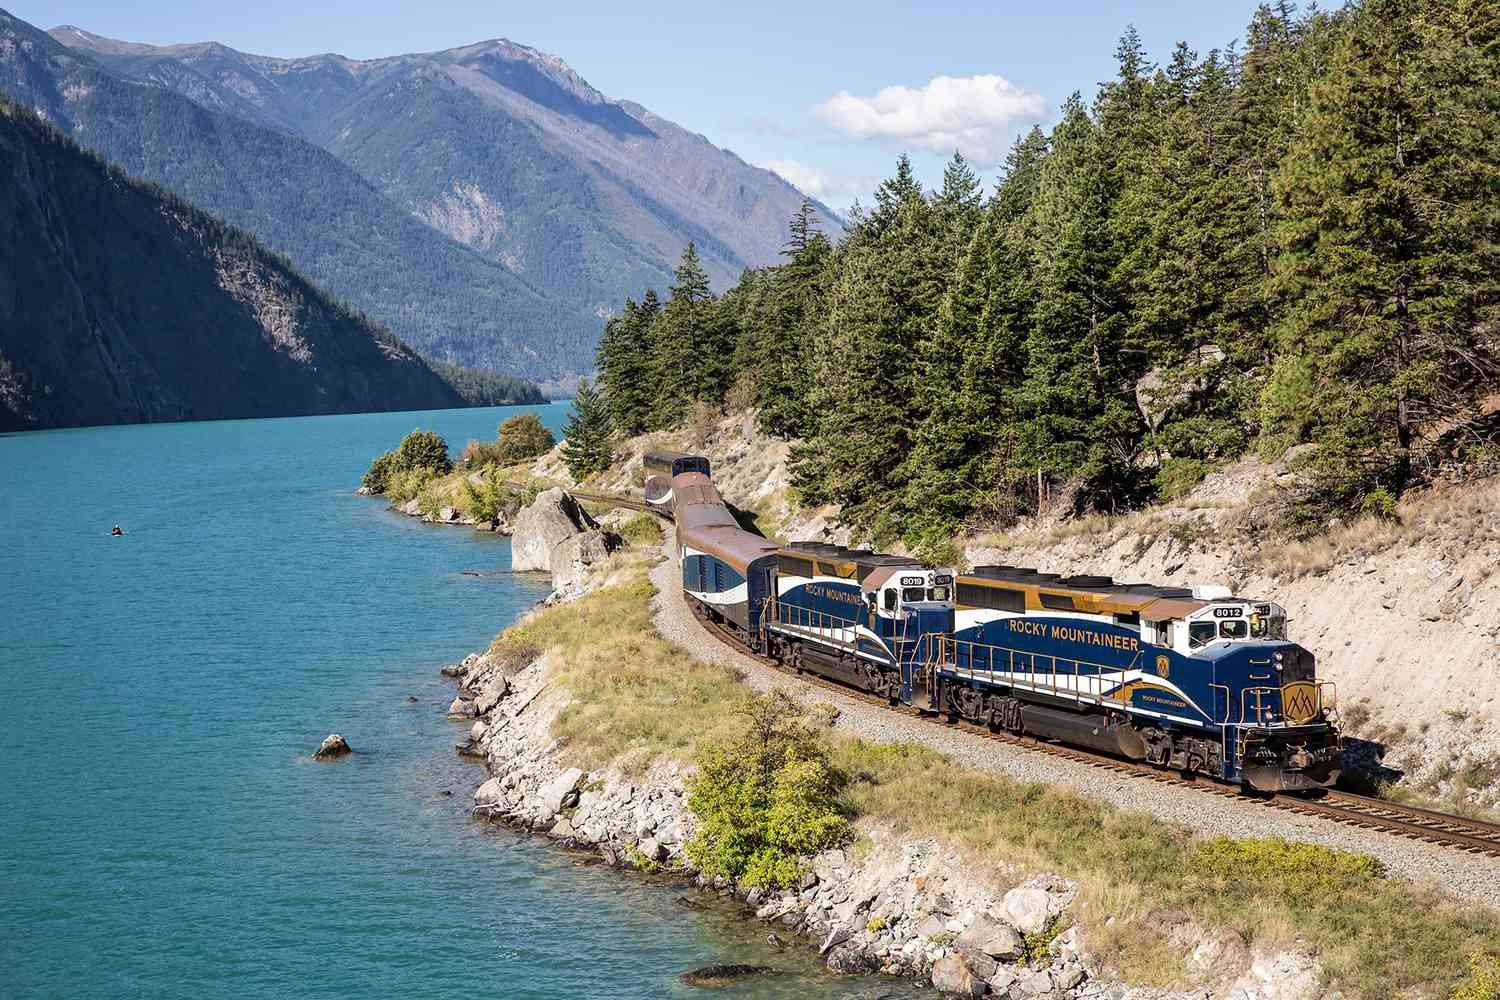 Rocky Mountaineer offers two classes of service: SilverLeaf and GoldLeaf. SilverLeaf features large windows, comfortable reclining seats, and delicious hot meals served at your seat.